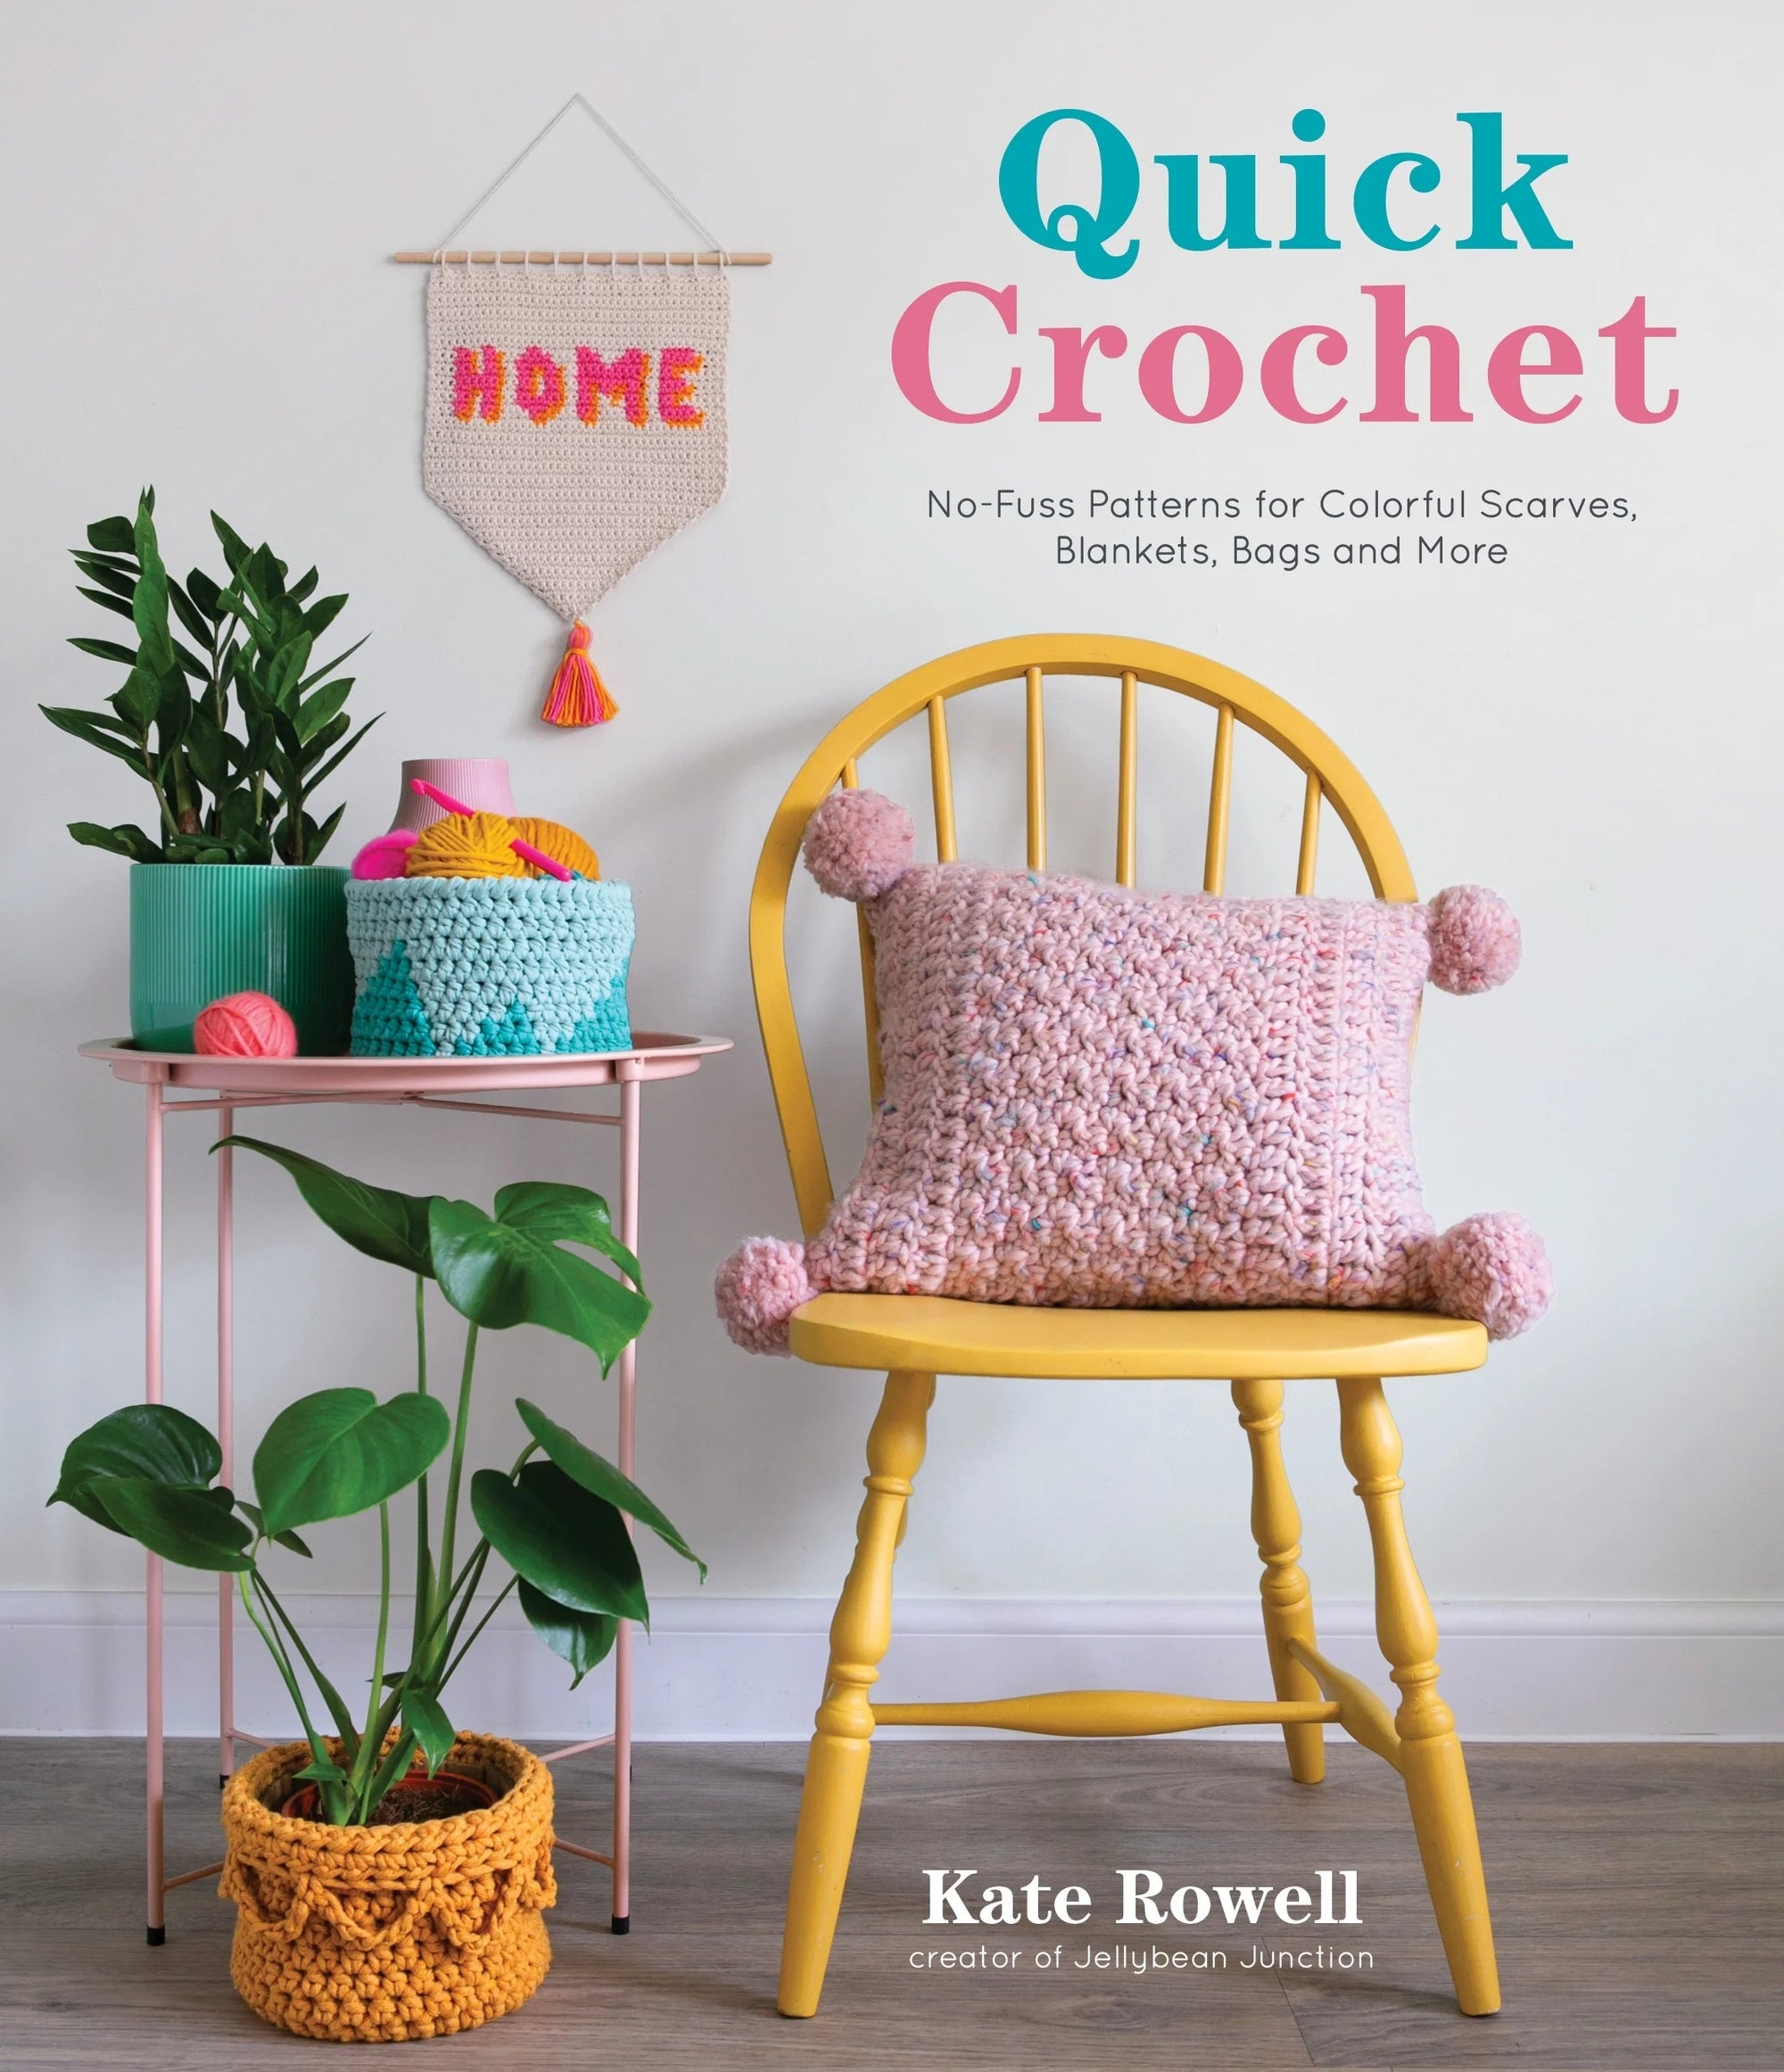 Quick Crochet: No-Fuss Patterns for Colourful Scarves, Blankets, Bags and More - Kate Rowell - The Little Yarn Store